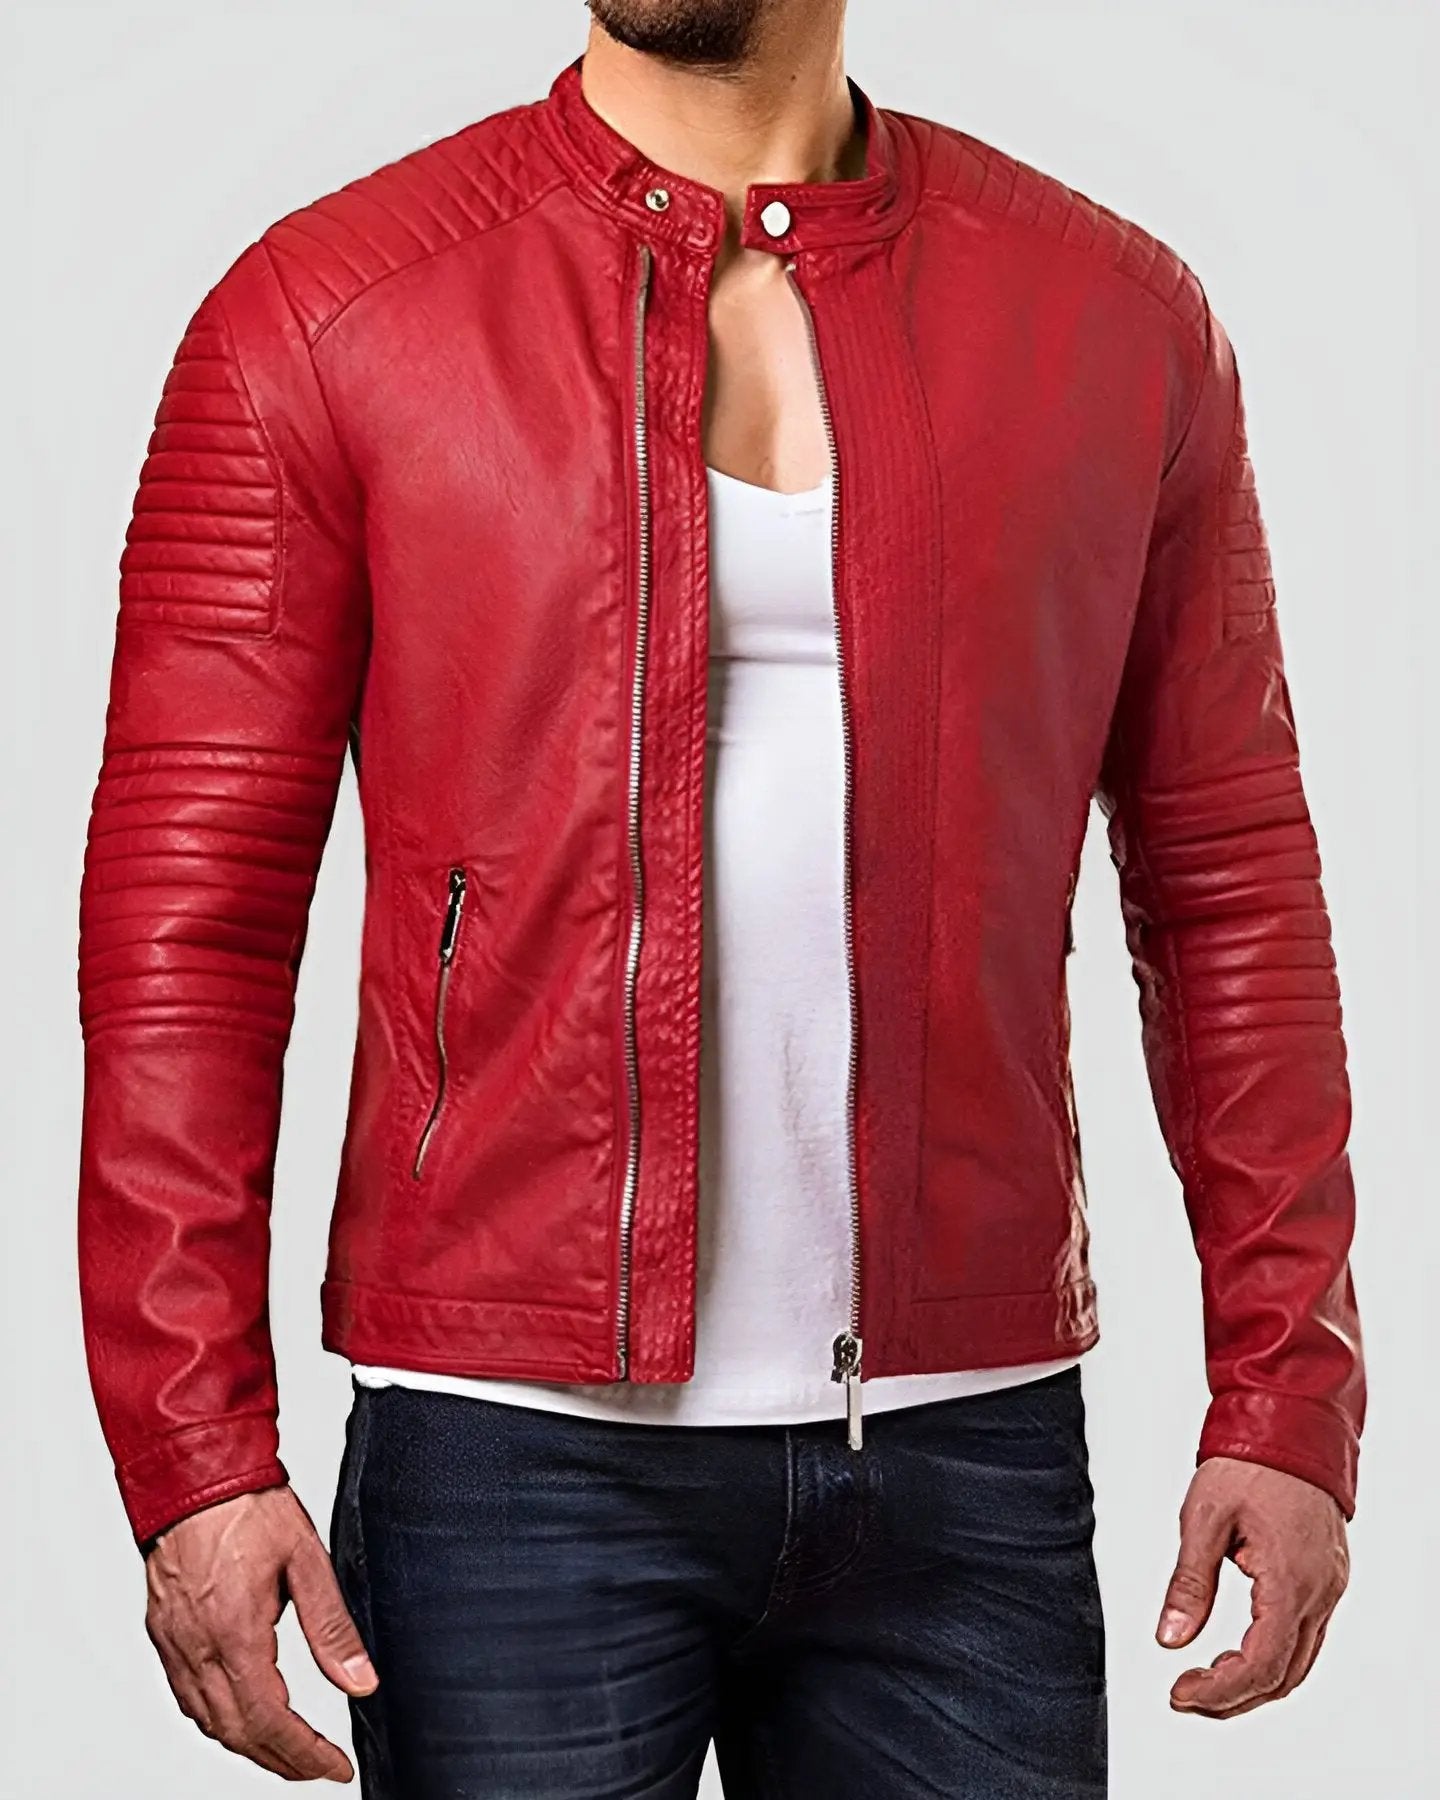 The Real McCoy's The Real McCoy's Type A-2 Leather Jacket - Red Silk –  Standard & Strange